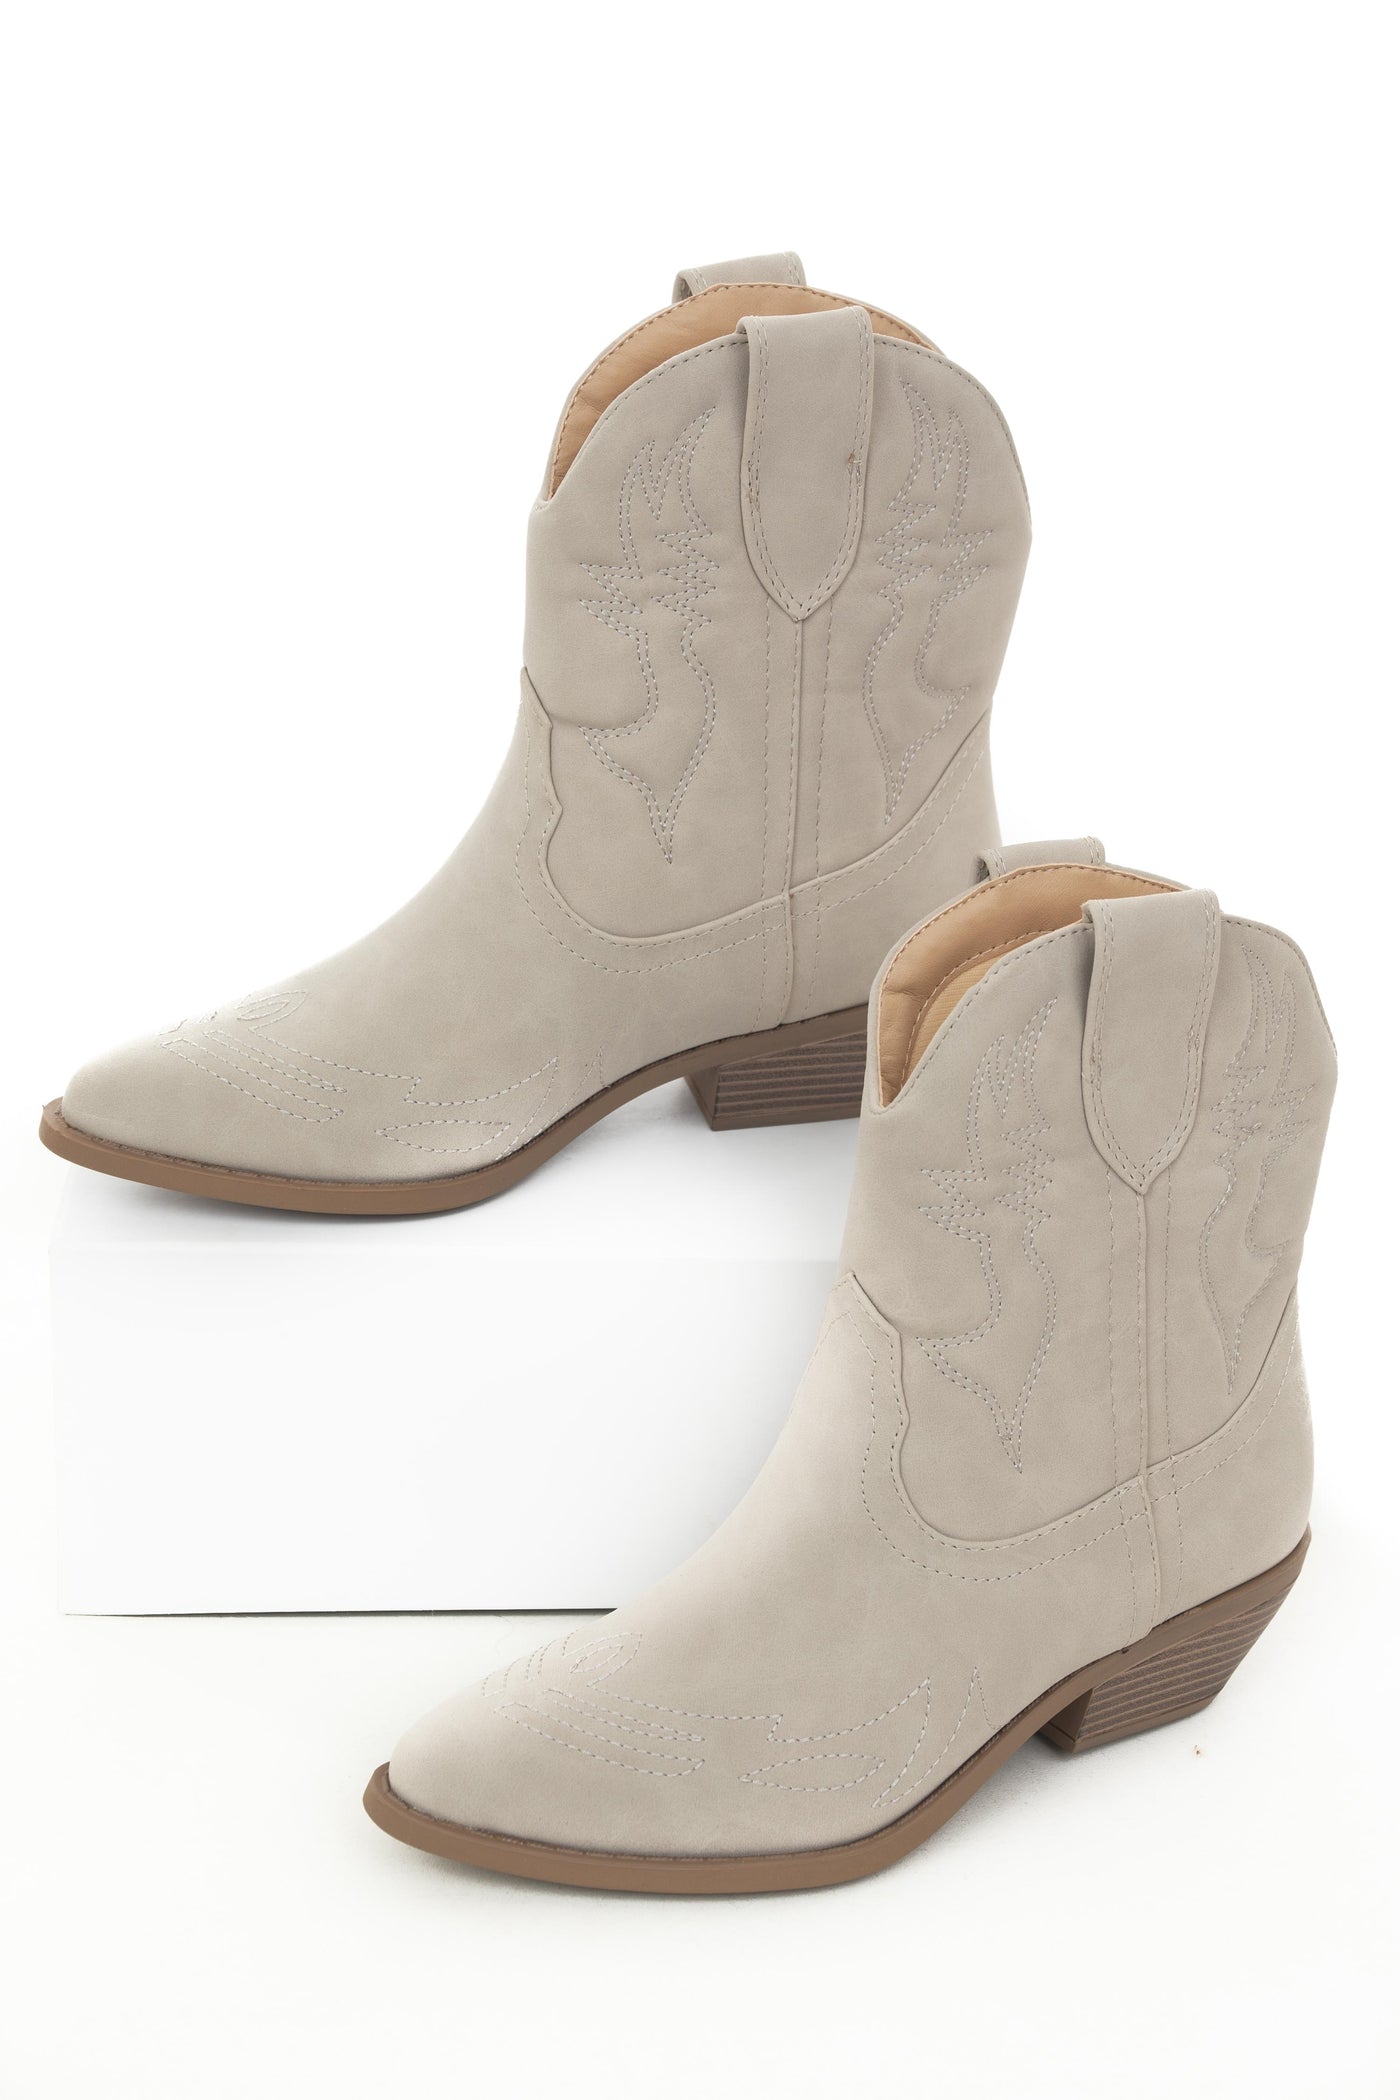 Oatmeal Western Style Pointed Toe Booties